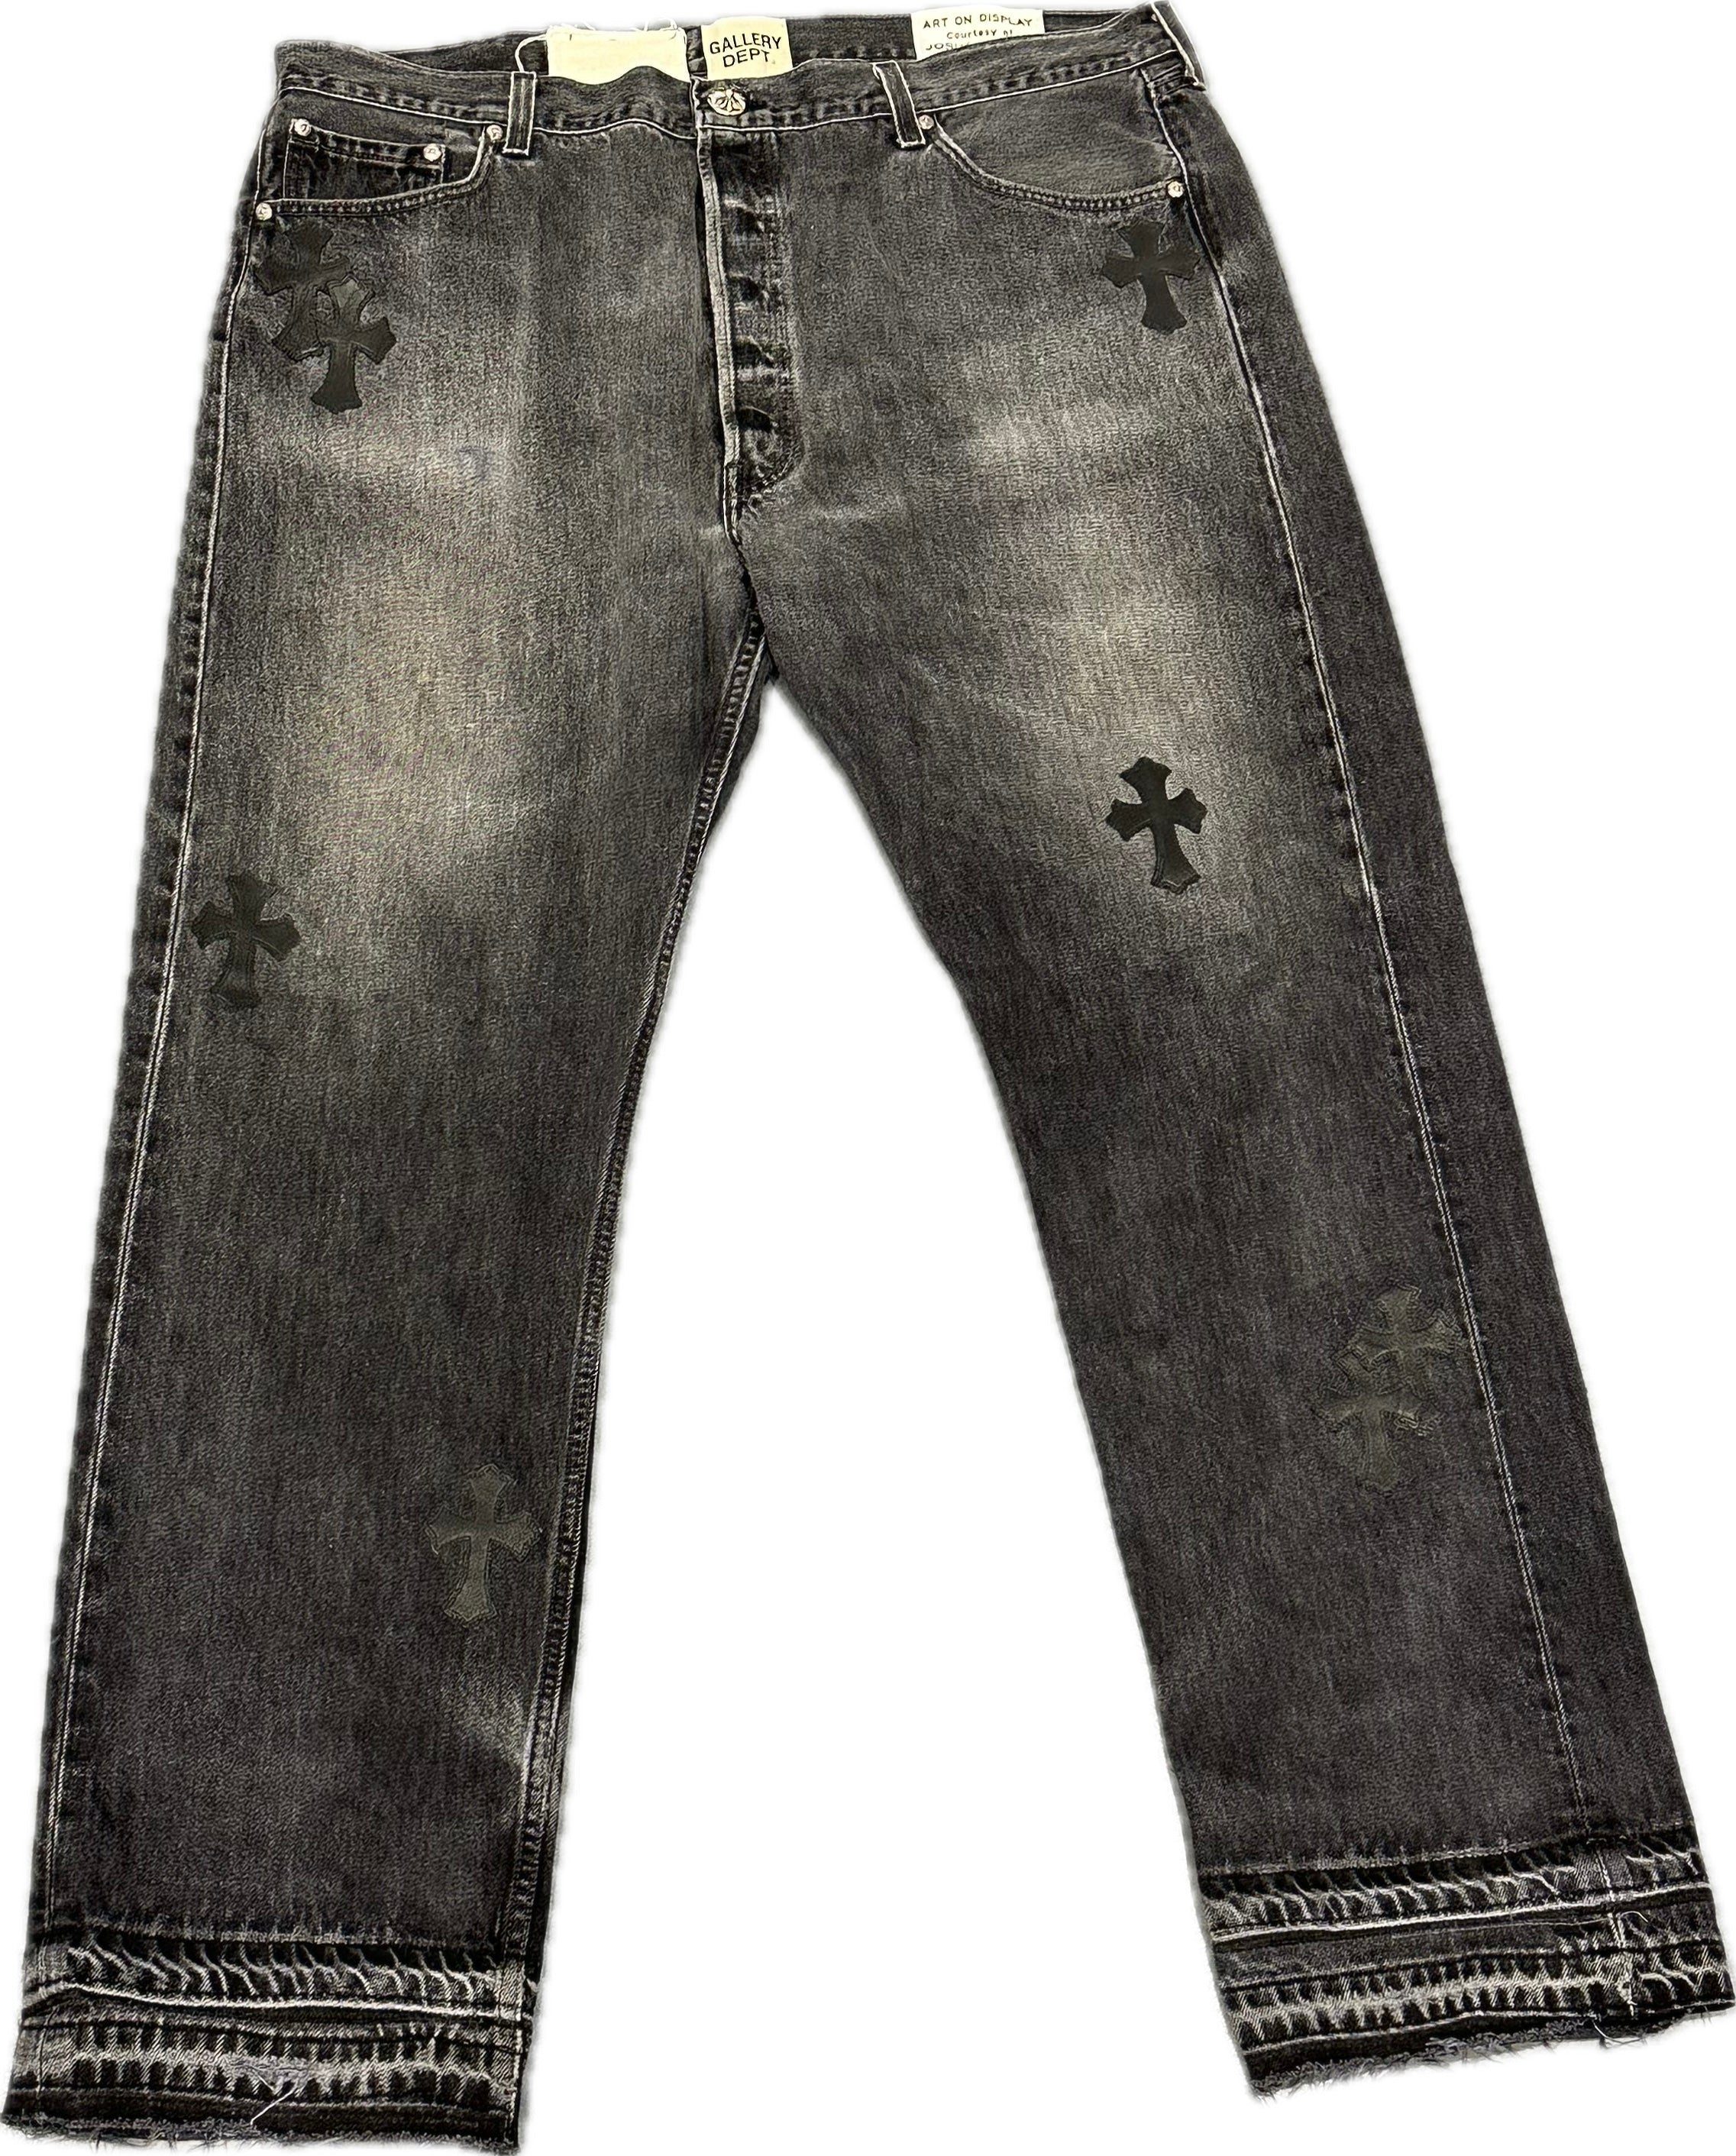 Gallery Dept x Chrome Heart Levi Leather Cross Flared Jeans